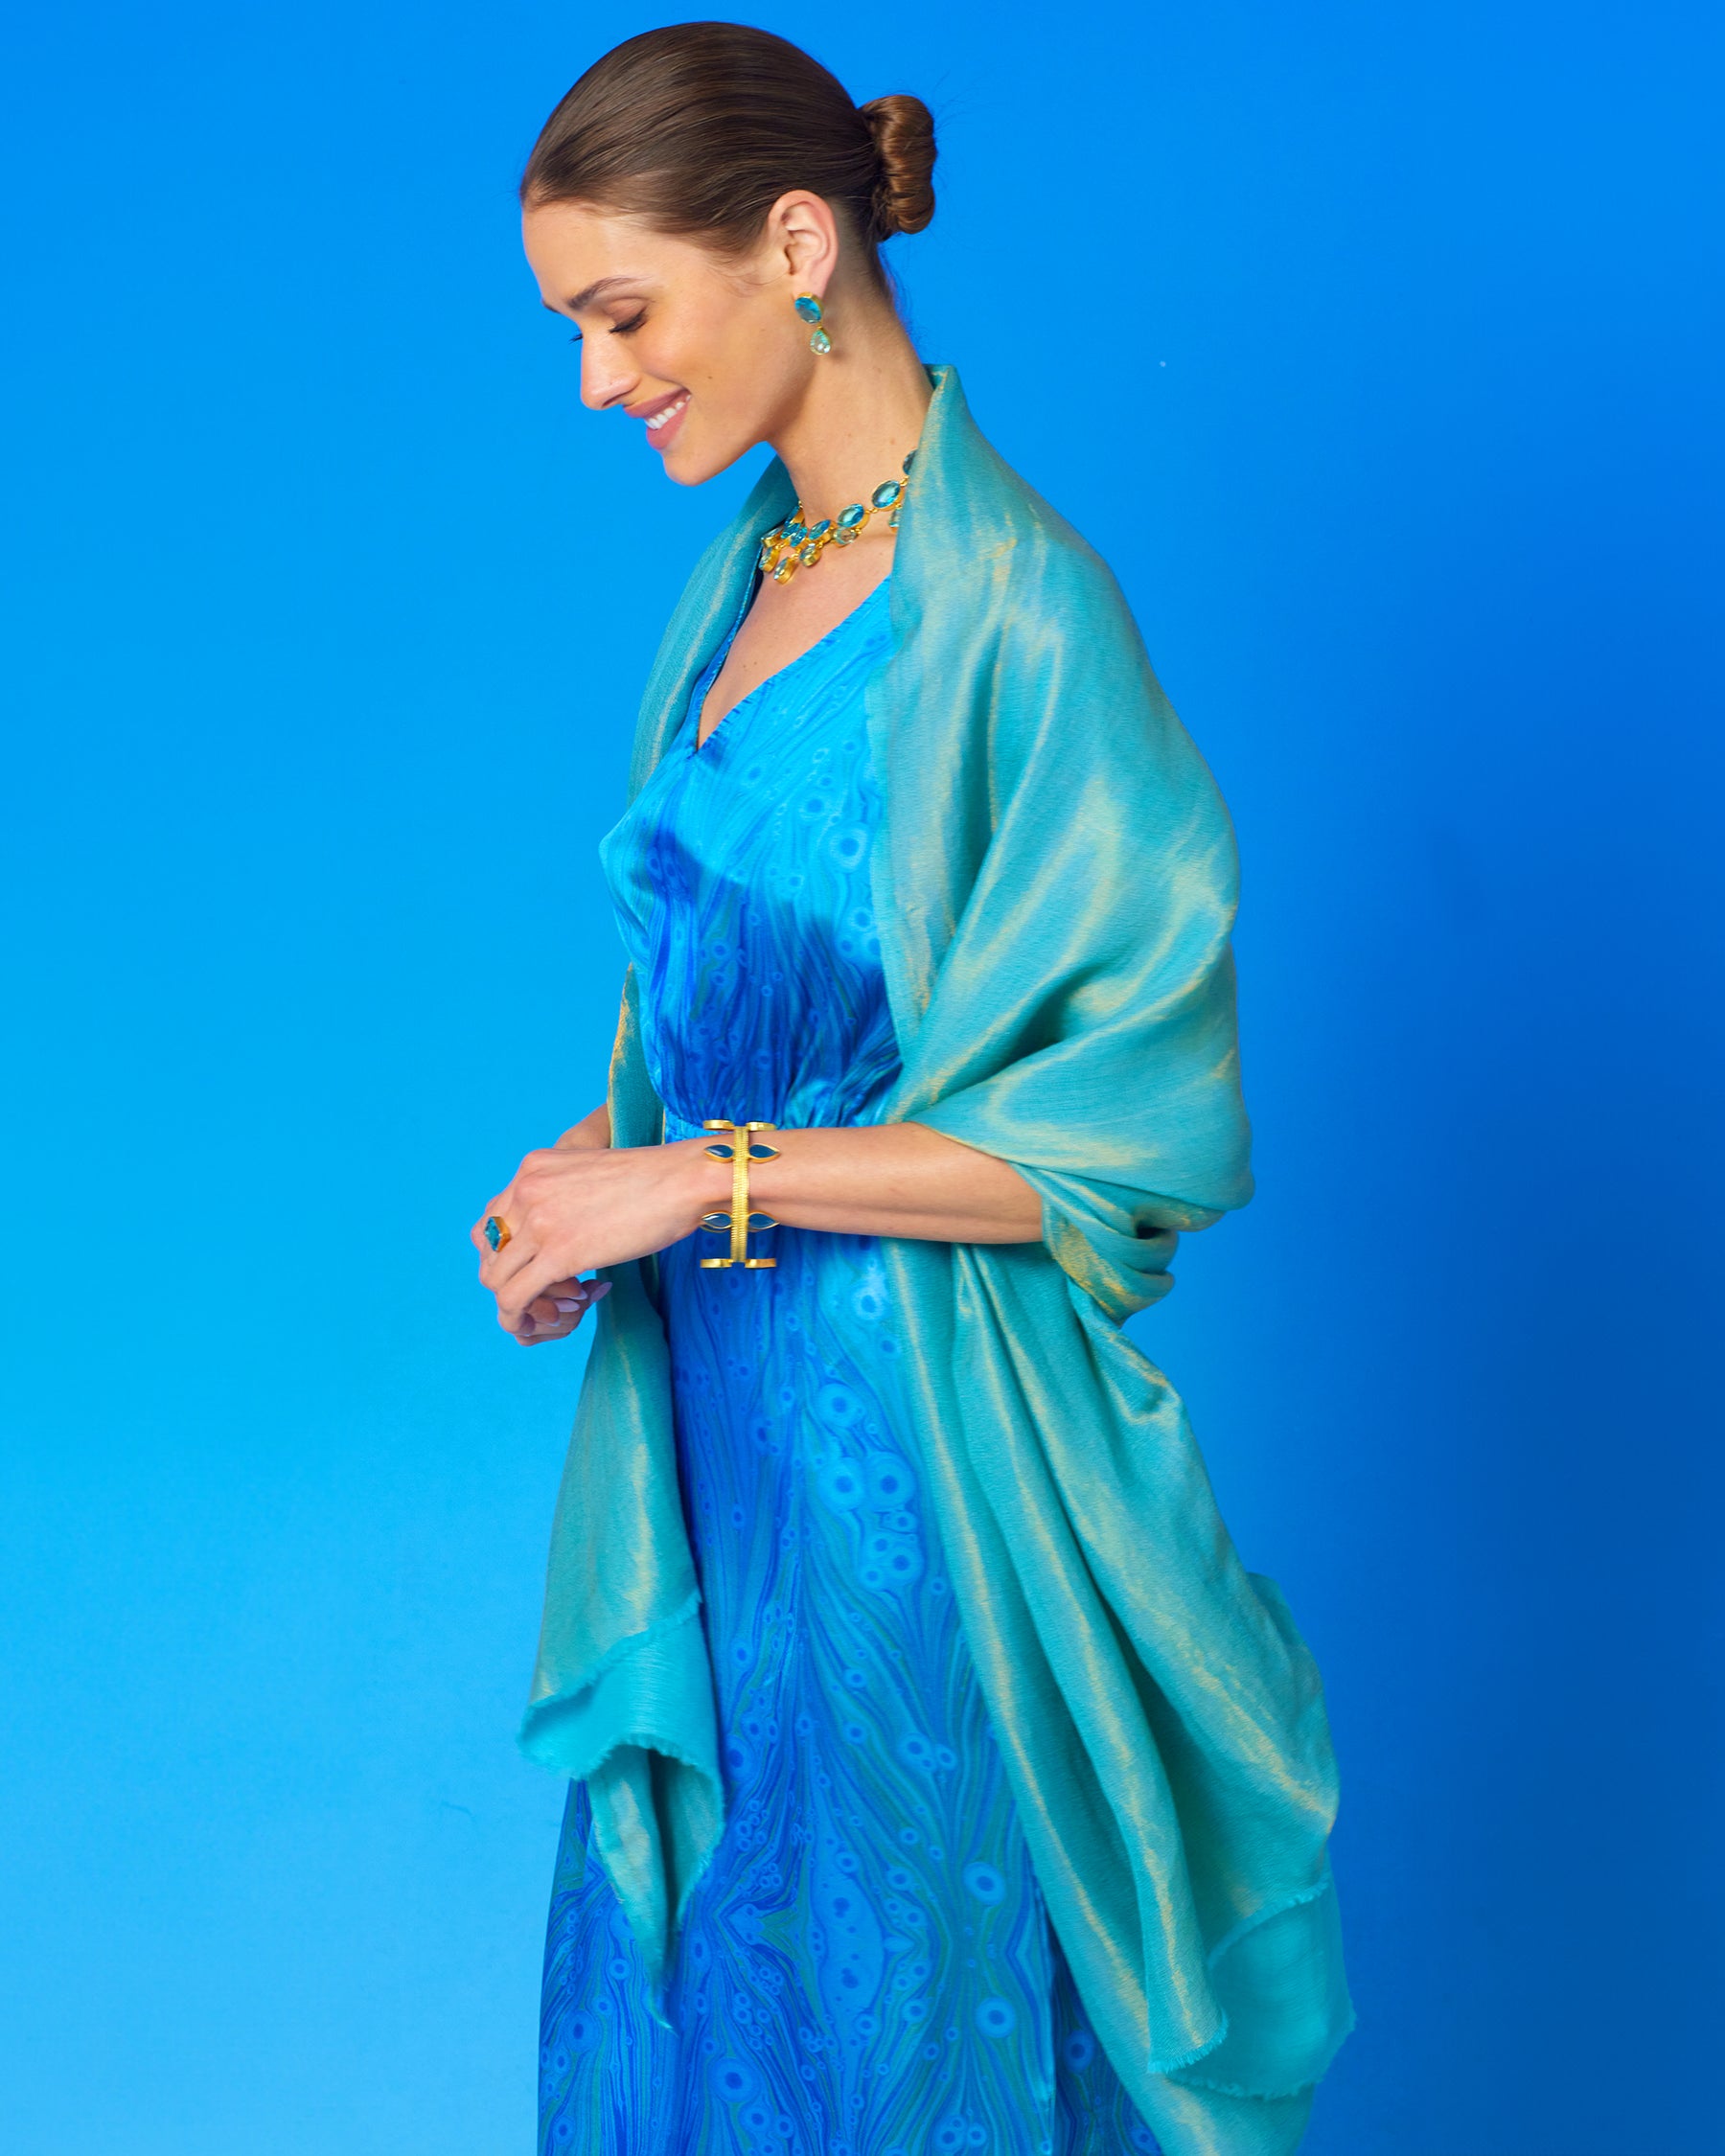 Josephine Reversible Pashmina Shawl in Gold Shimmer Turquoise worn with the Delfina Silk Dress